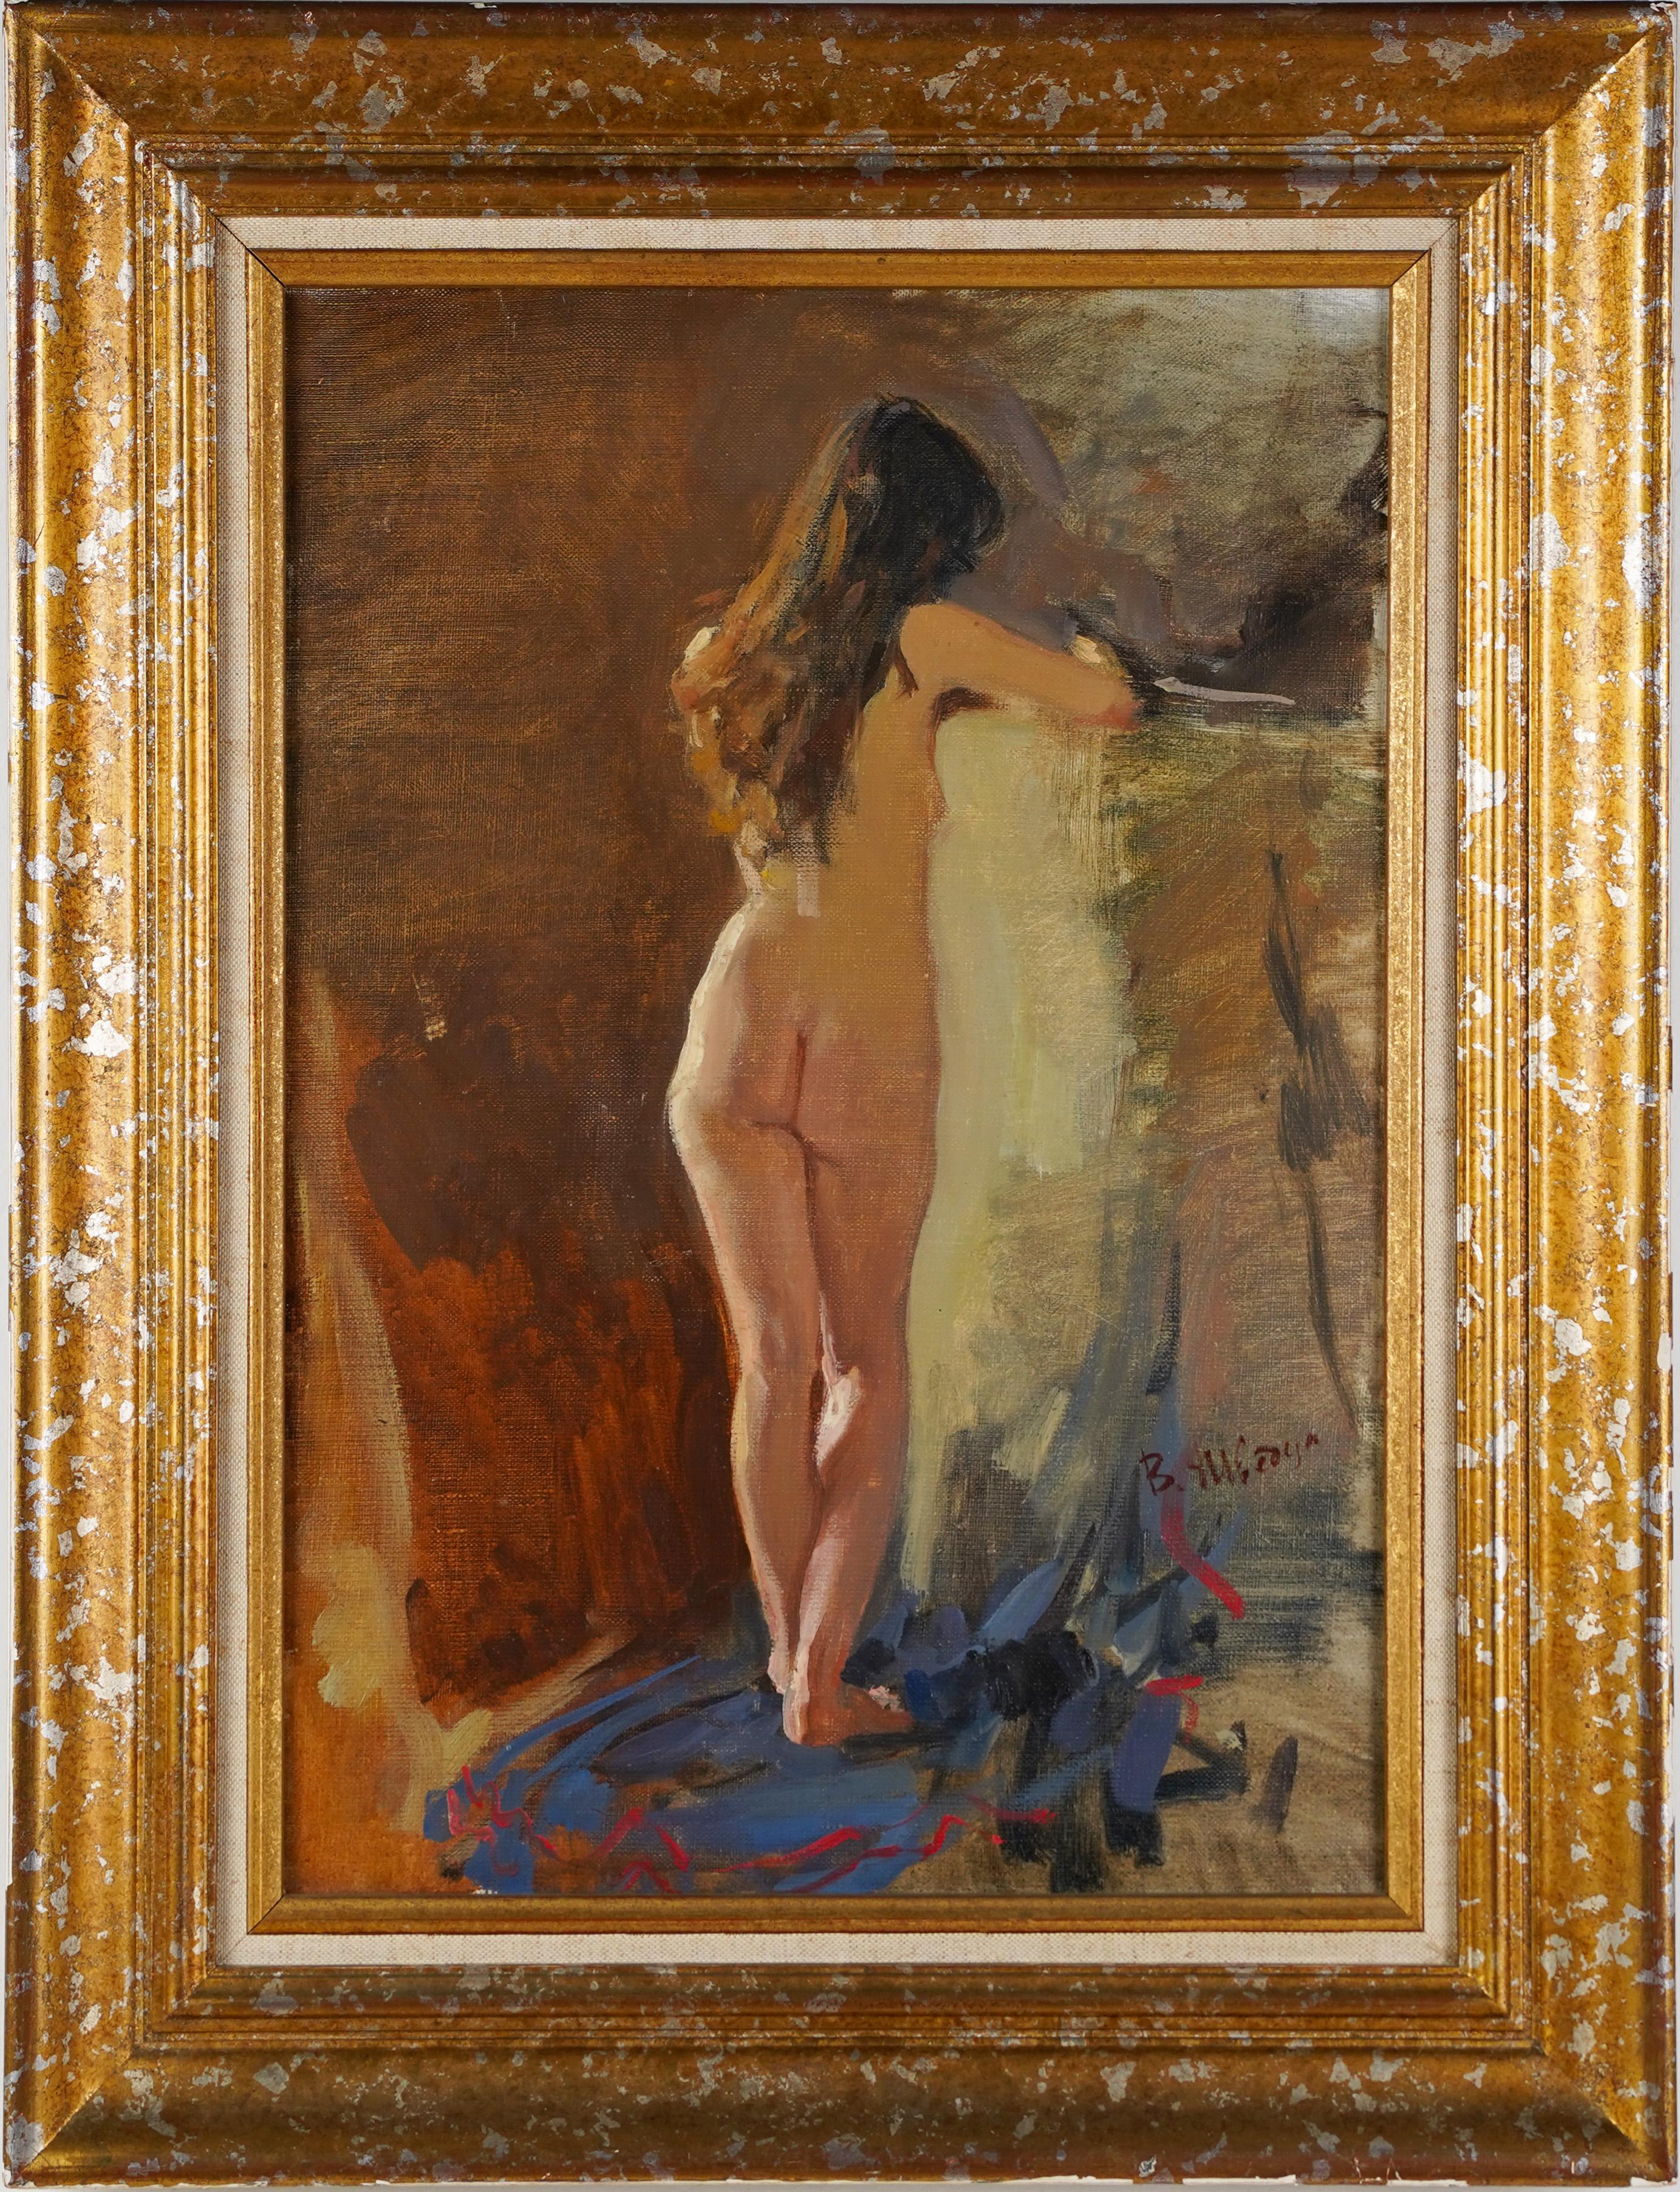 Antique impressionist nude interior portrait painting. Oil on canvas, circa 1950.  Housed in a vintage frame.   Image size, 14L x 20H. 
